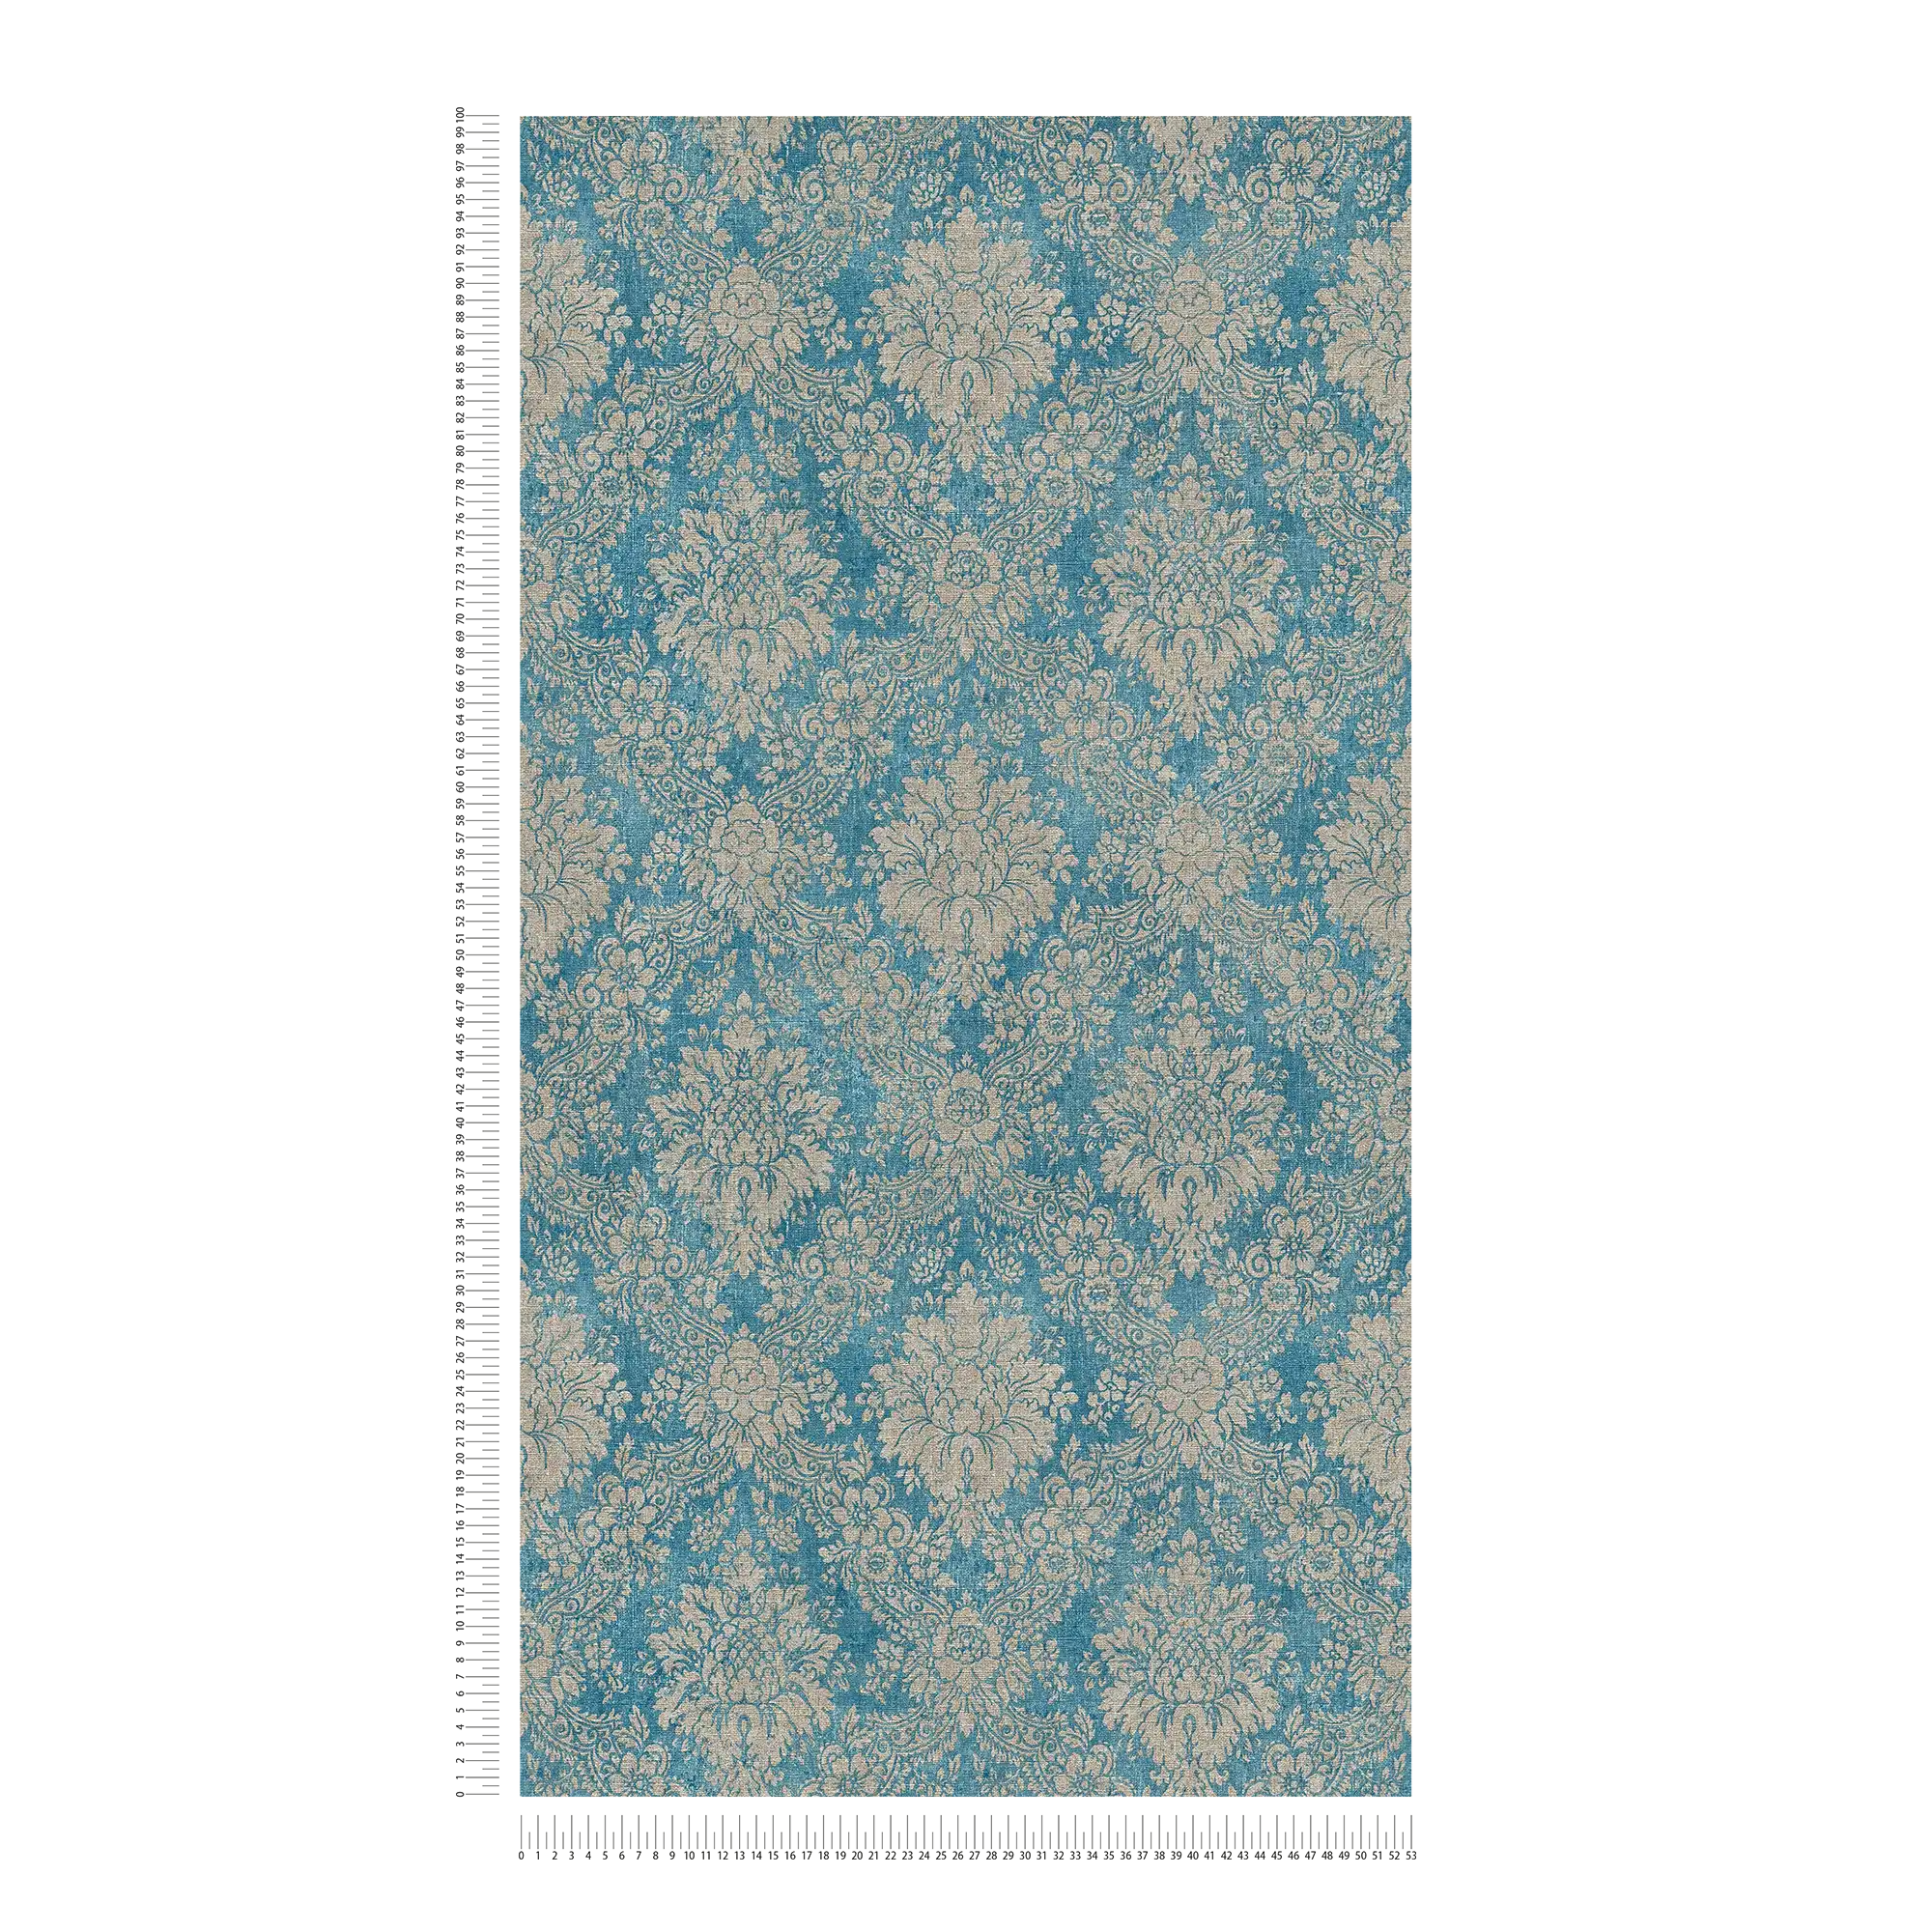             Floral ornament wallpaper with metallic effect & used look - blue, brown, metallic
        